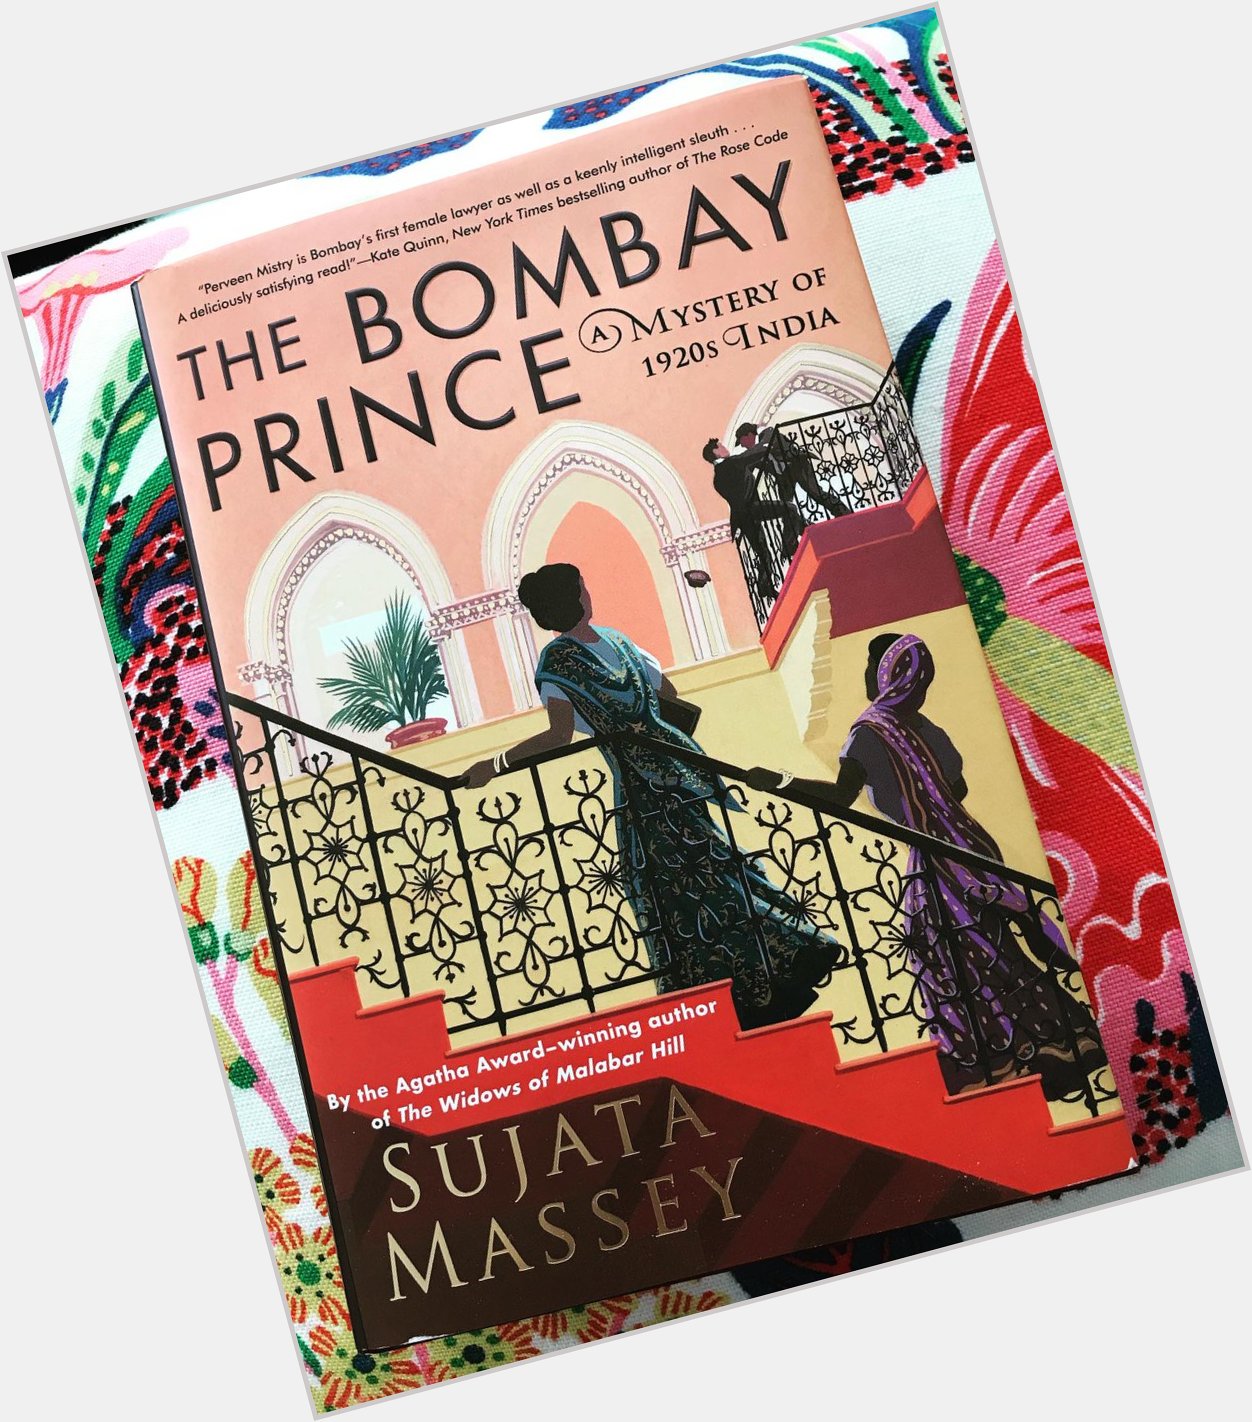 Happy book birthday, Can\t wait to start THE BOMBAY PRINCE!  